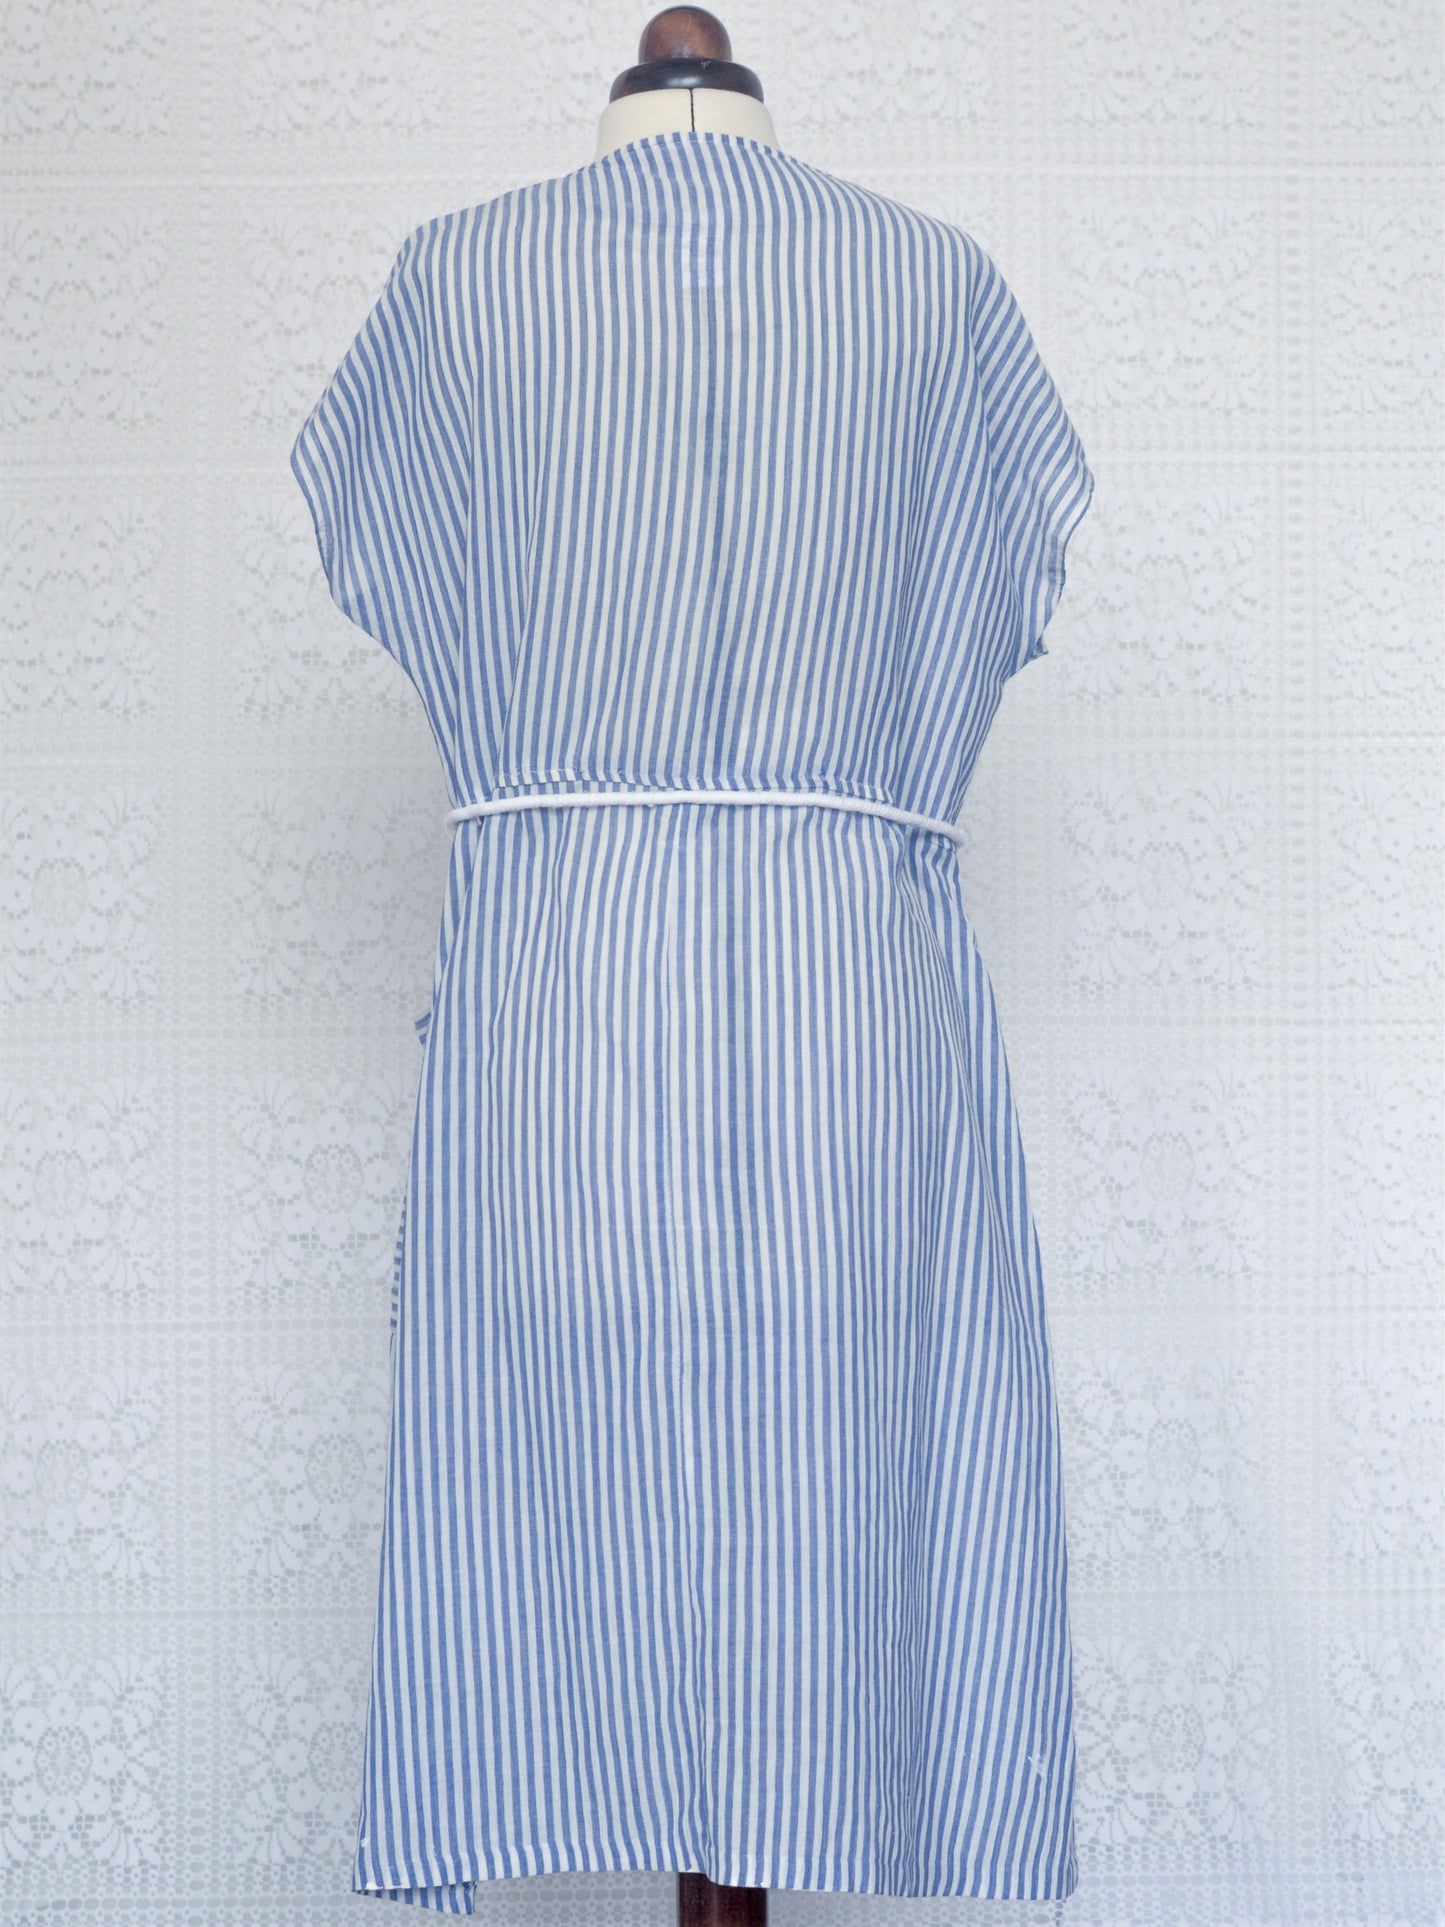 1980s blue and white striped dress with rope belt